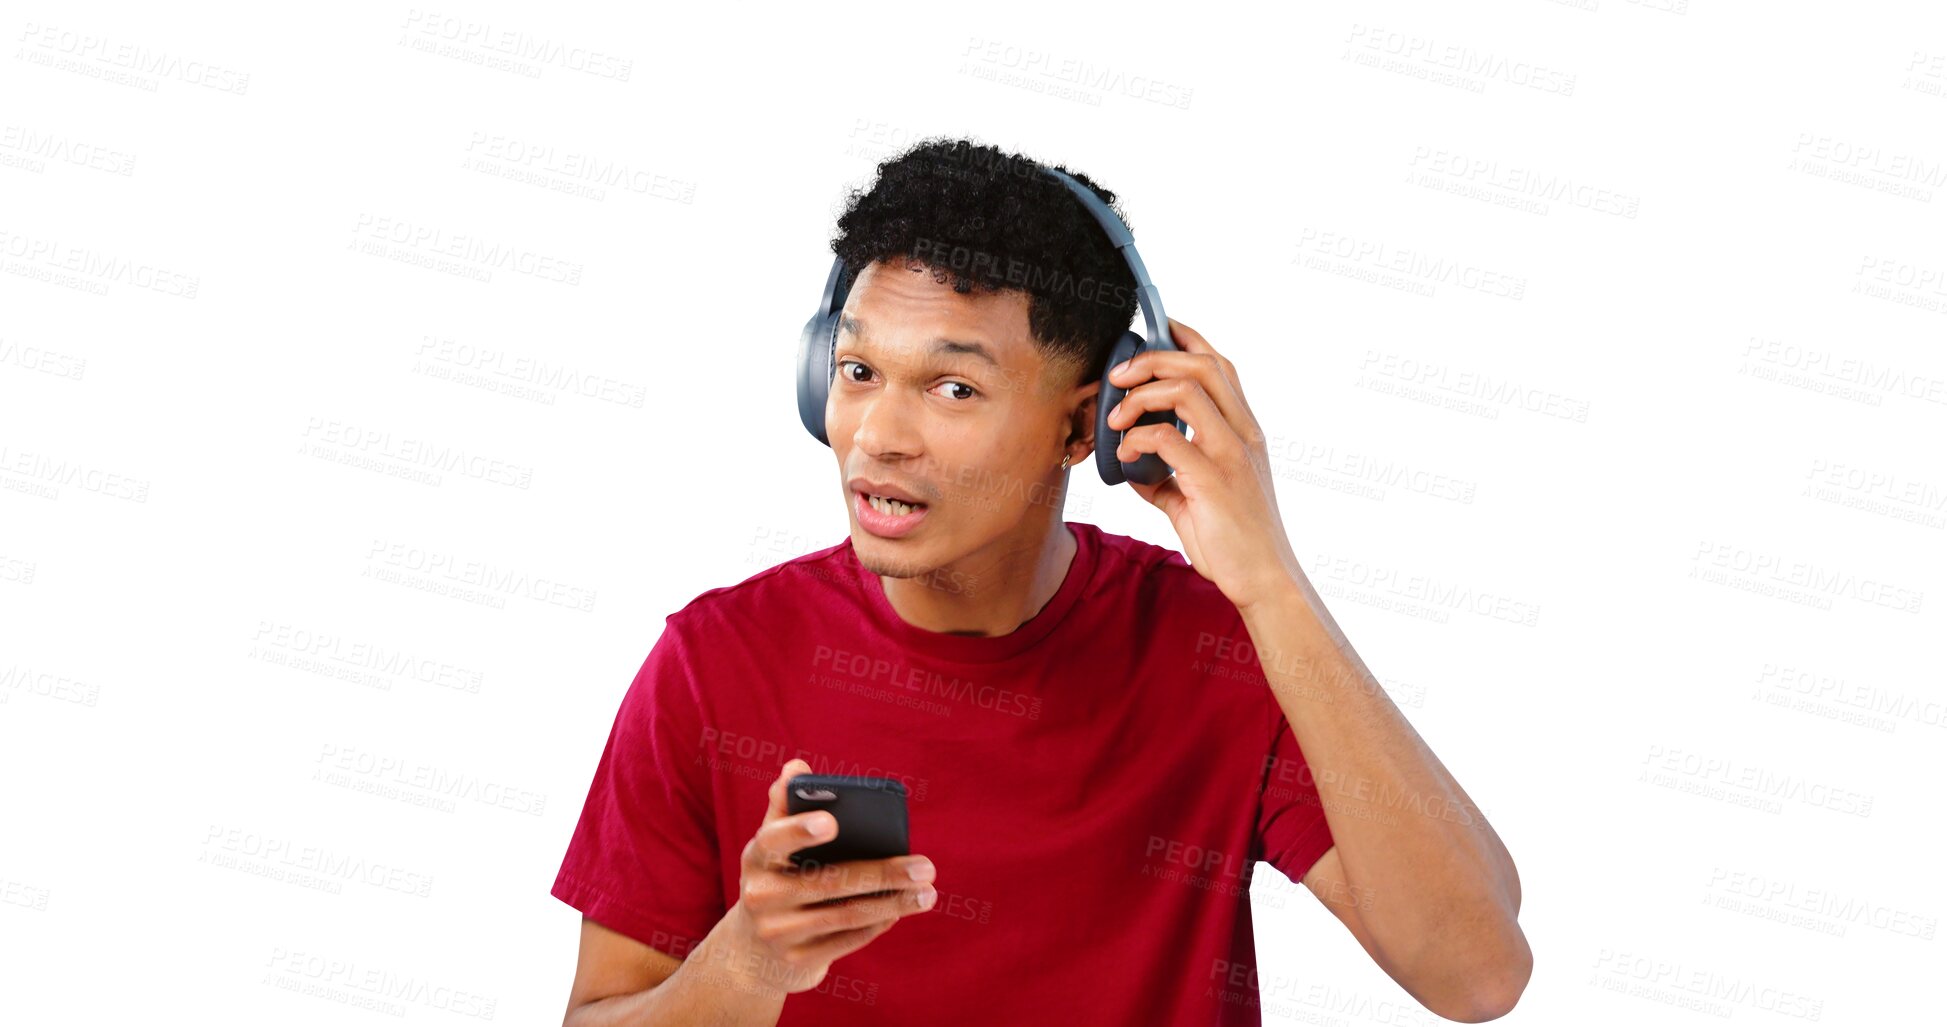 Buy stock photo Man, portrait and headphones with cellphone for music listening to sound, playlist or podcast. Male person, face and smartphone on isolated transparent png background for digital app, radio or track